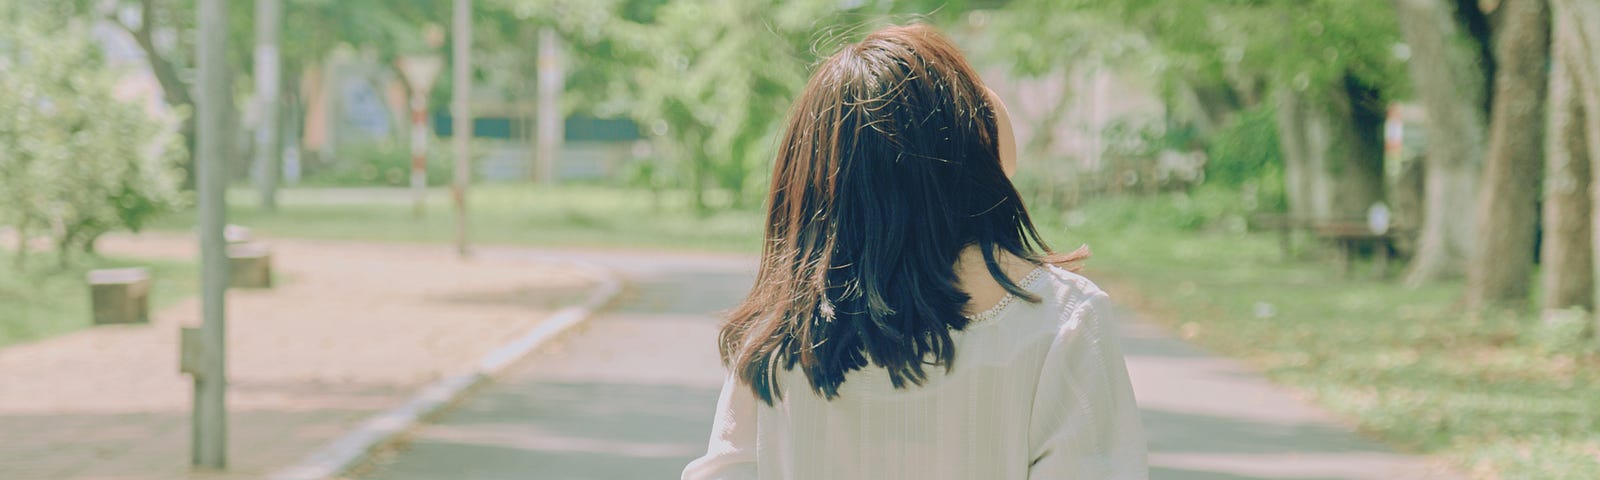 Back view of a girl holding her hands together behind her back and walking on a street among green trees.